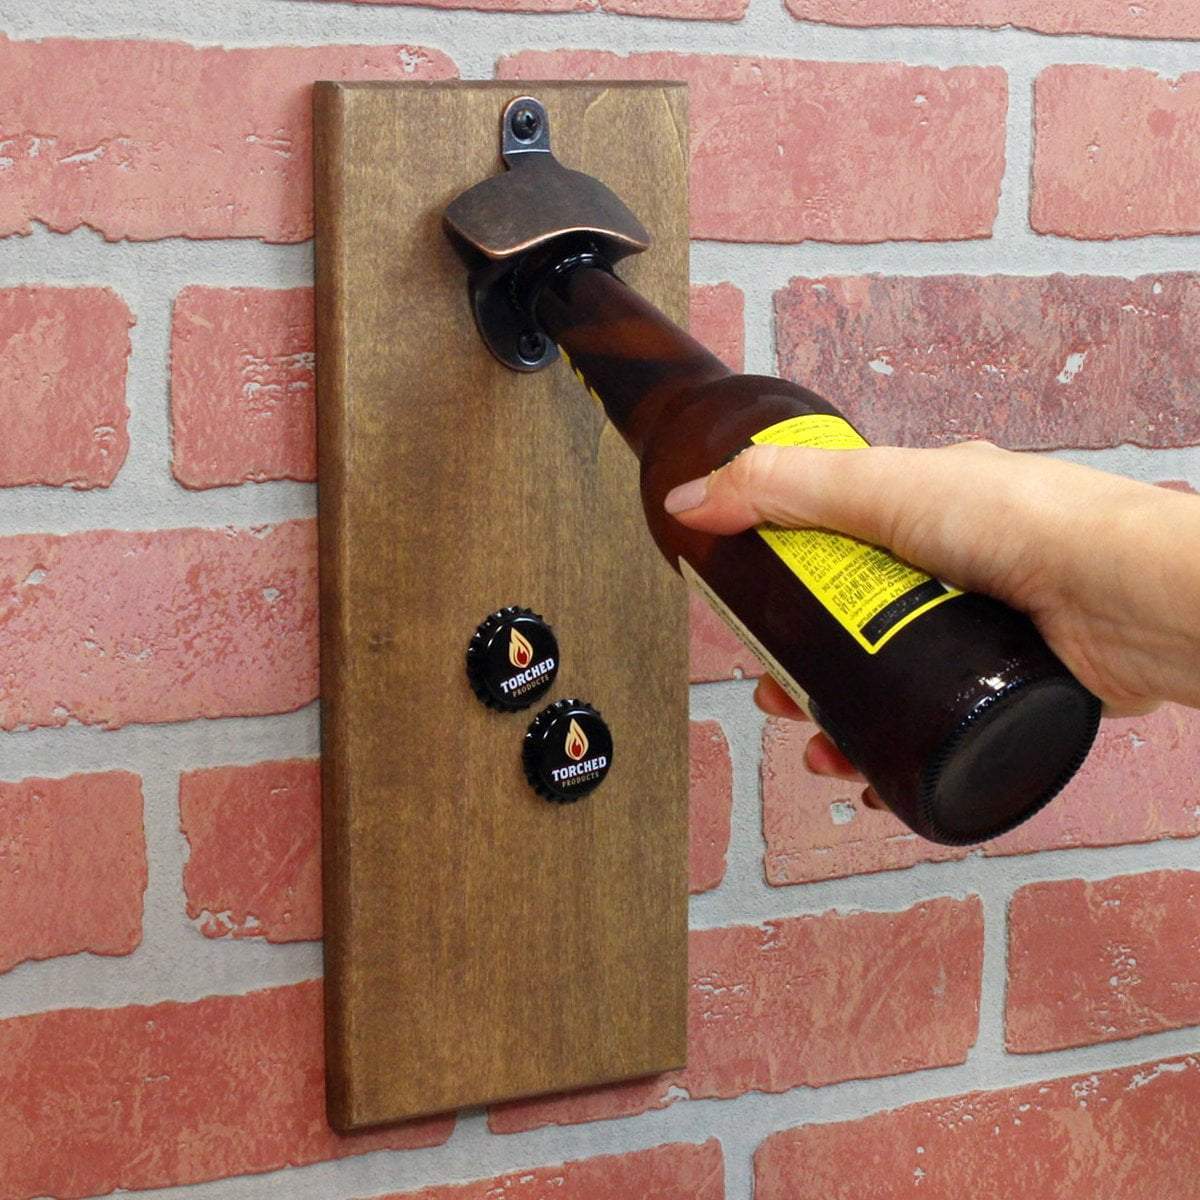 Torched Products Barware Wall Mounted Magnetic Bottle Opener - Holds over 100 Caps